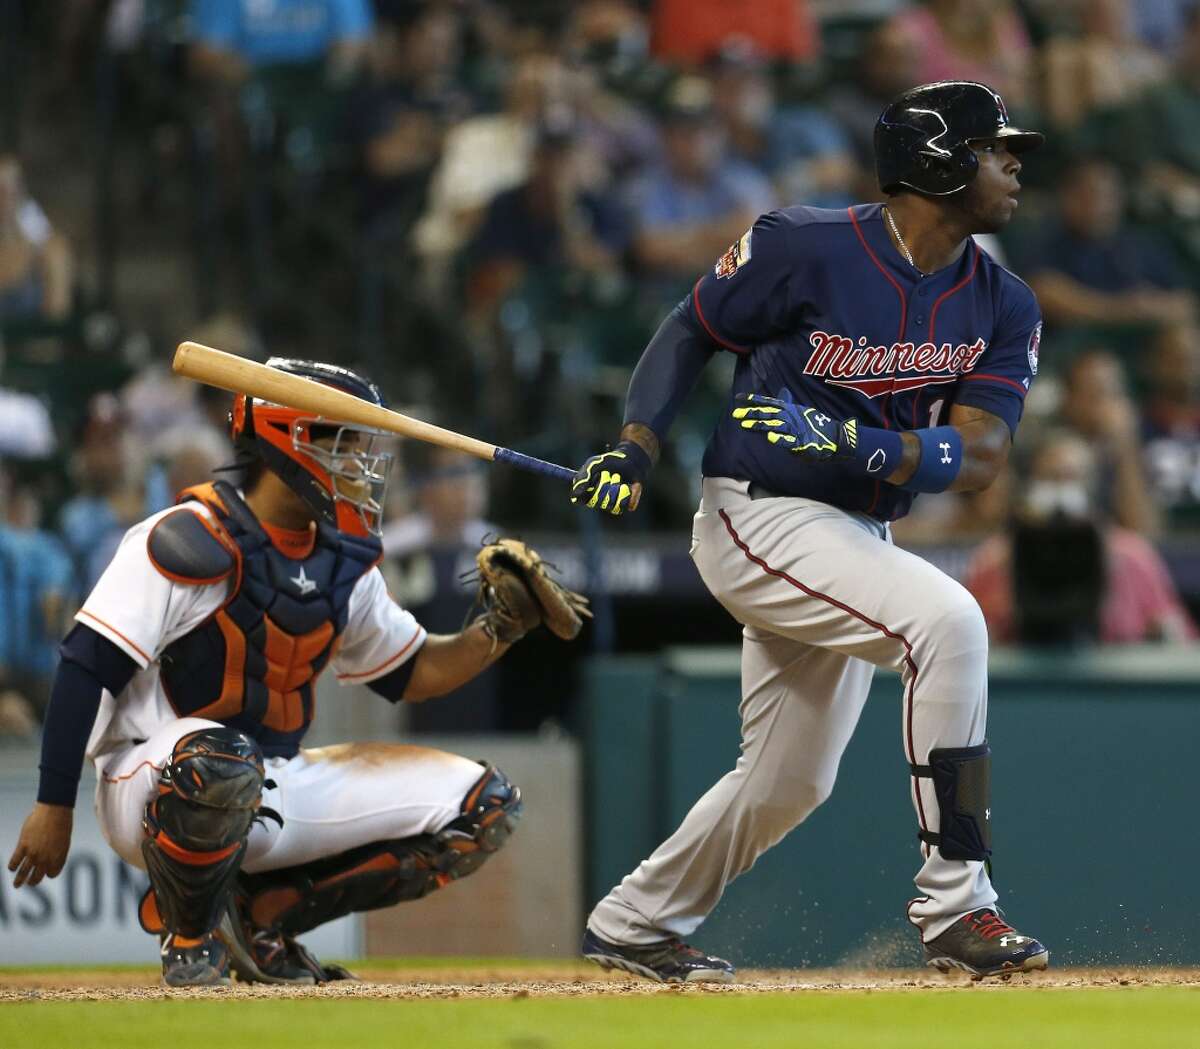 Twins first baseman Kennys Vargas (19) hits an RBI single during the eighth inning.